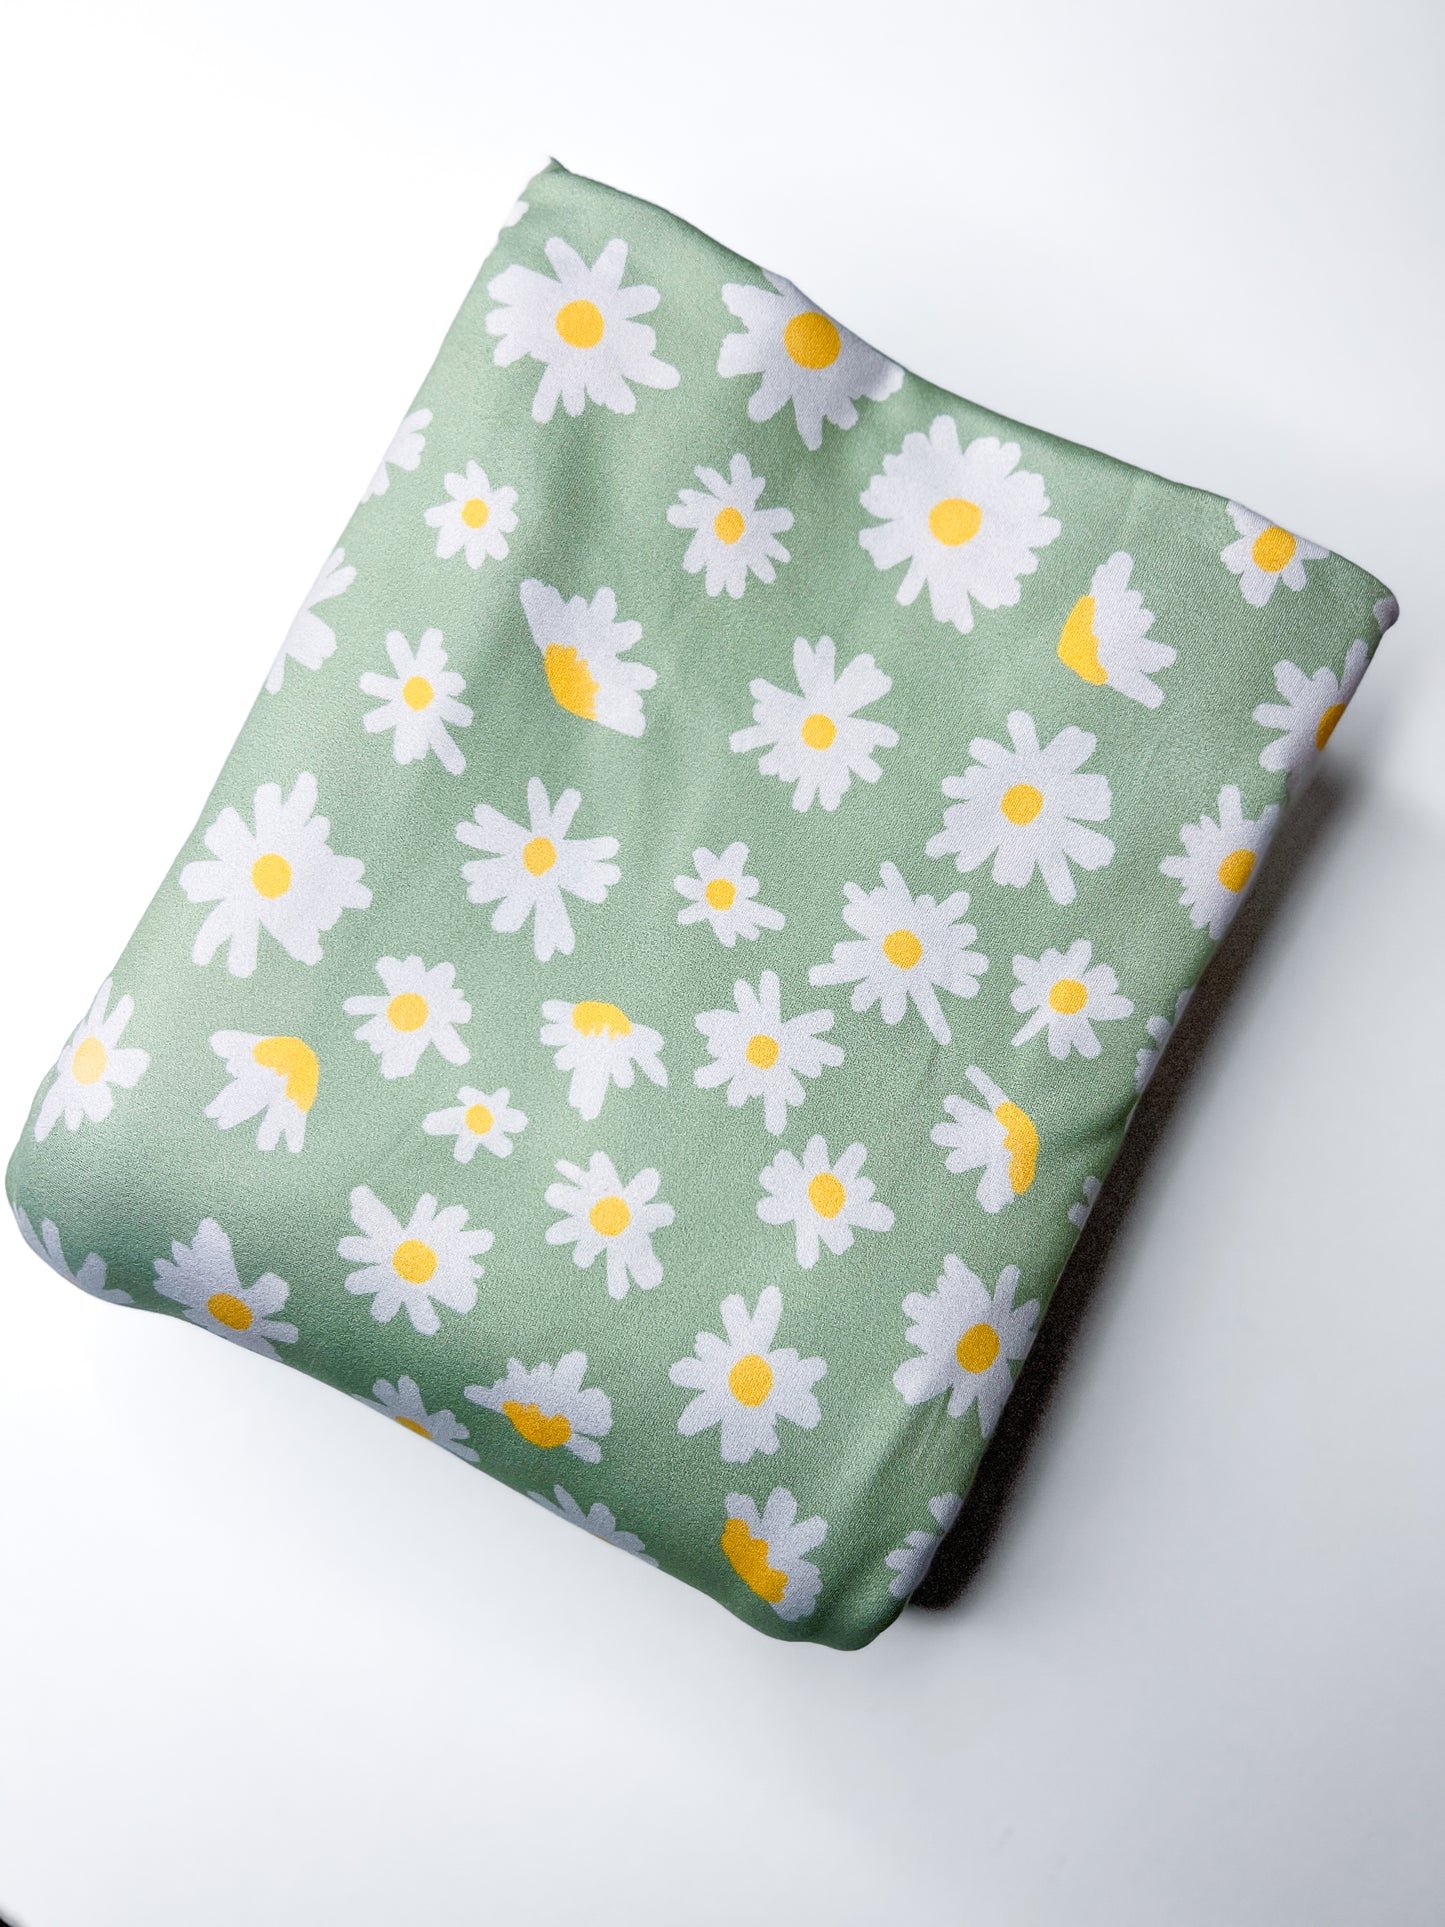 RTS - DBP(240gsm) - Dainty Blooms Green